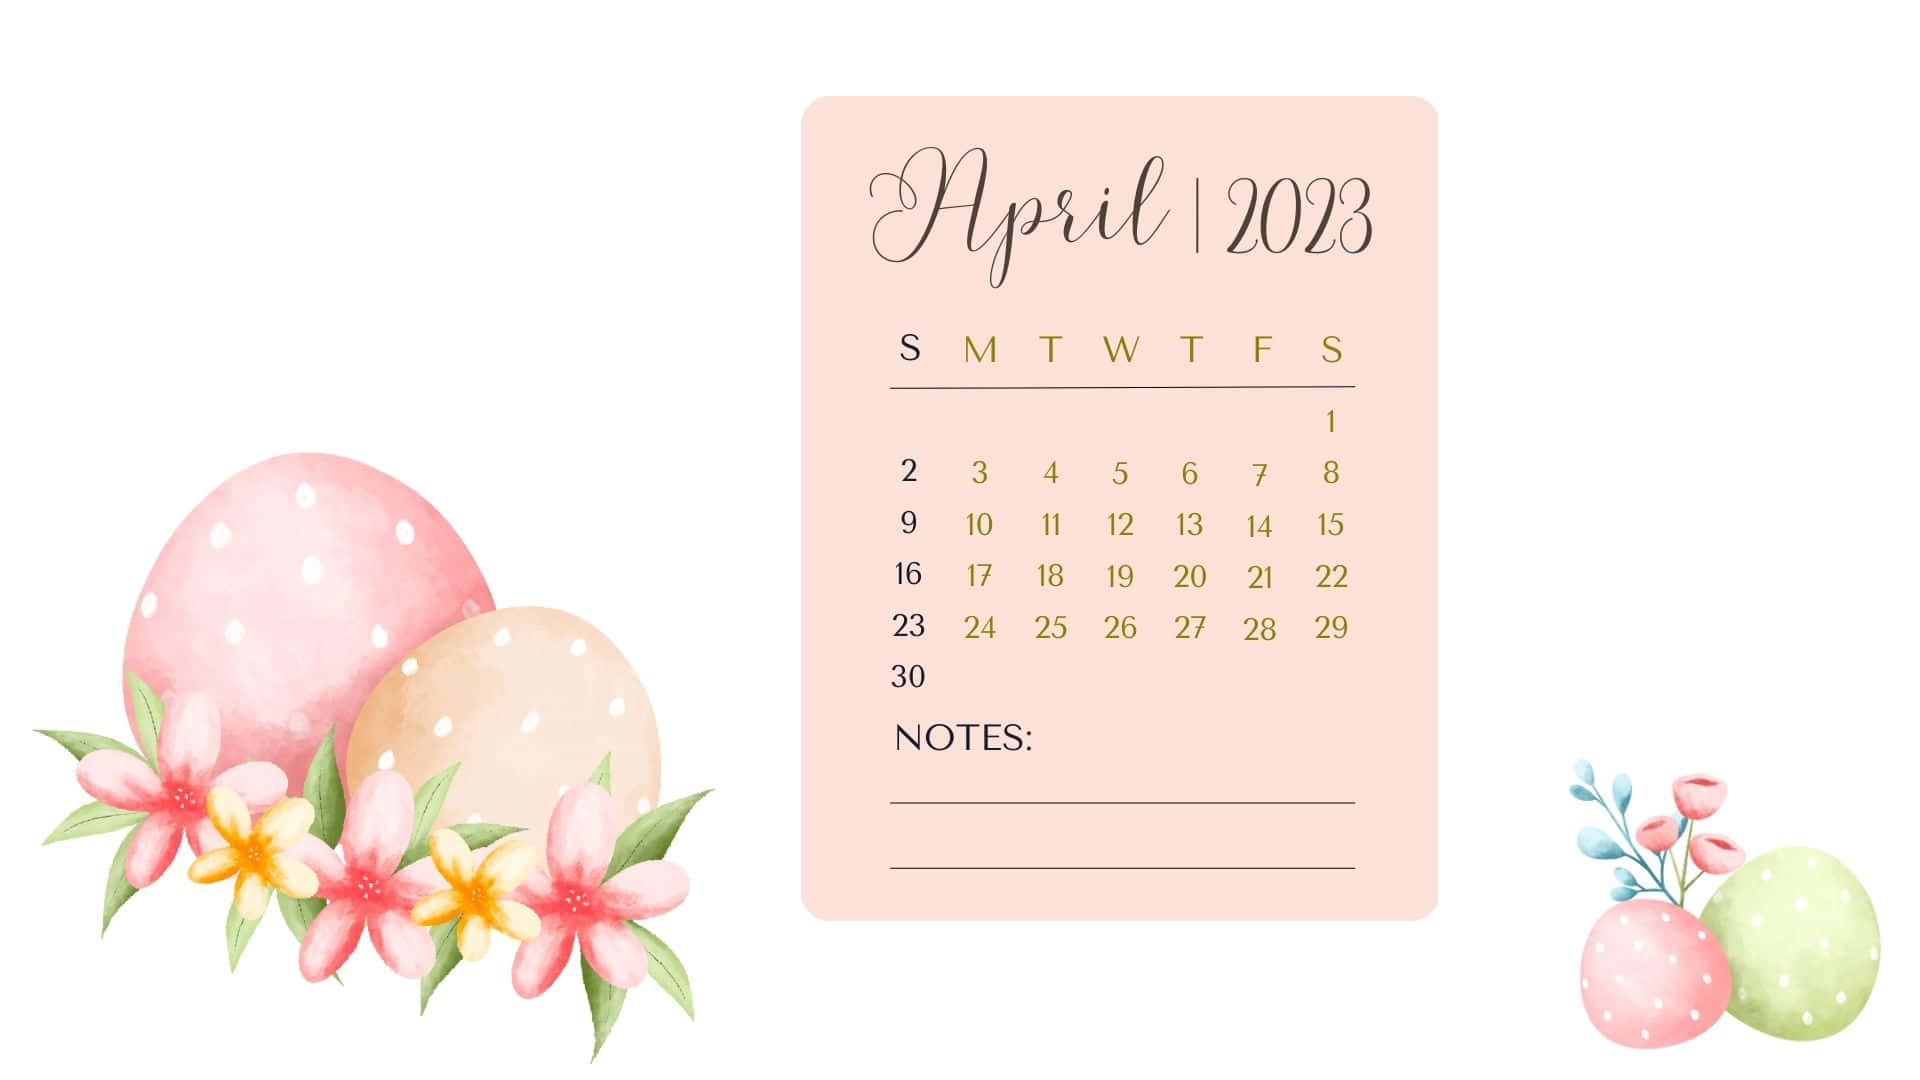 A Calendar With Easter Eggs And Flowers Wallpaper